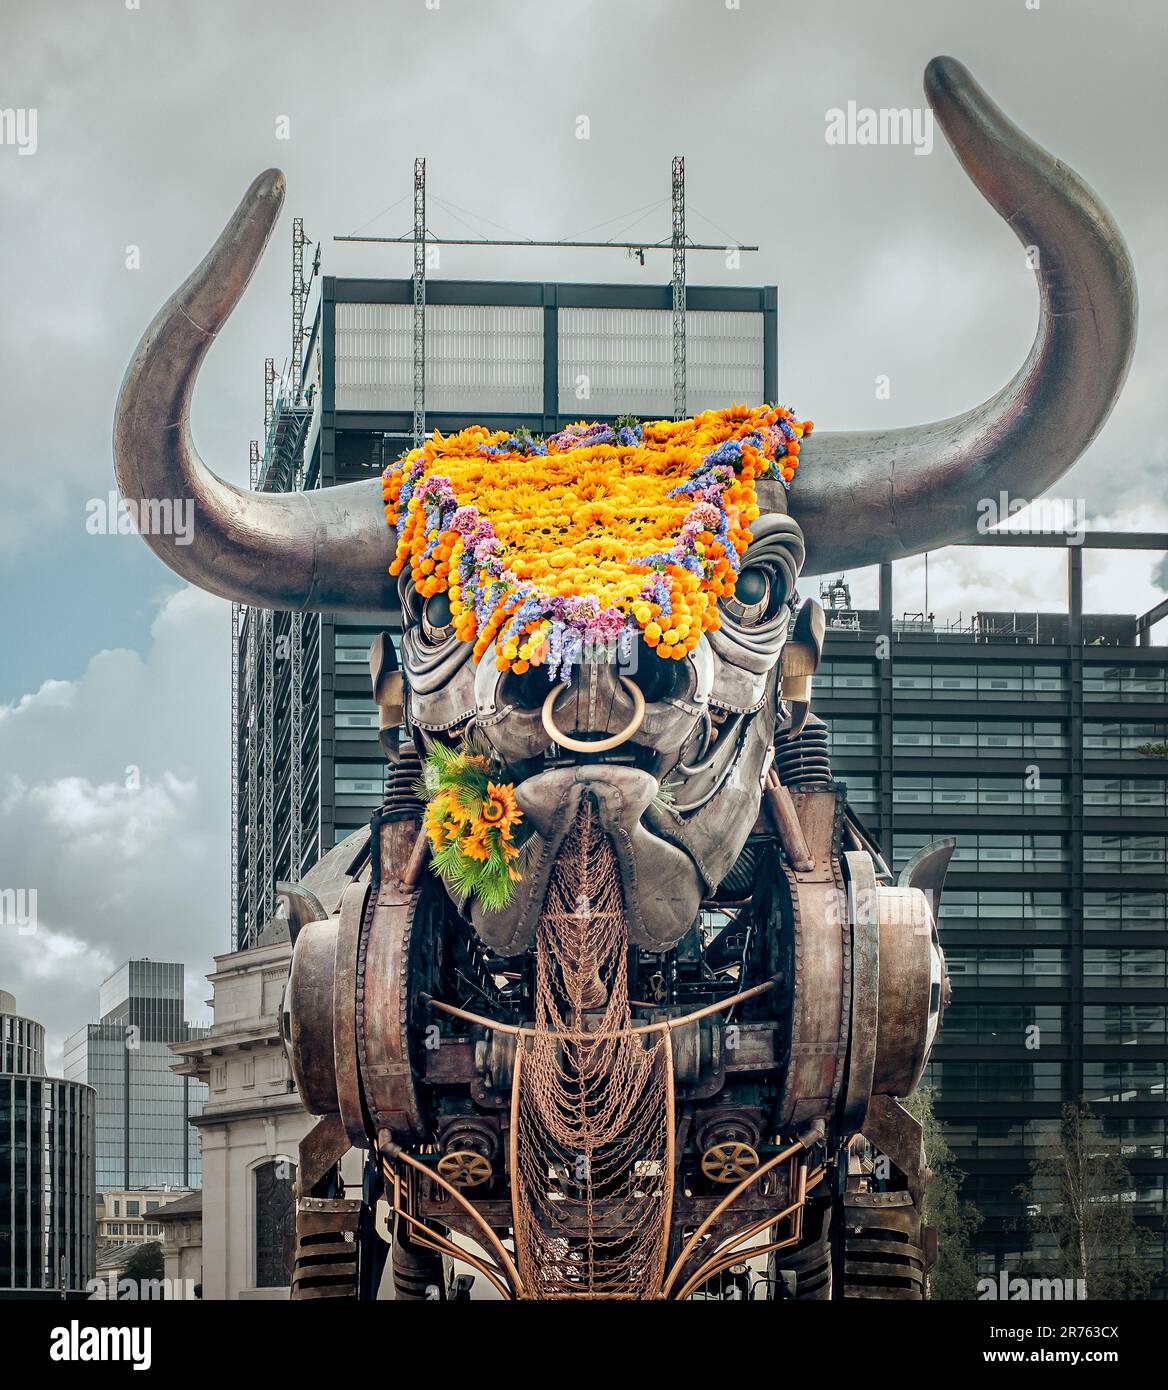 The iconic giant metal bull that was first seen at Birmingham Commonwealth games has its head covered with flowers during the Polinations event. Stock Photo